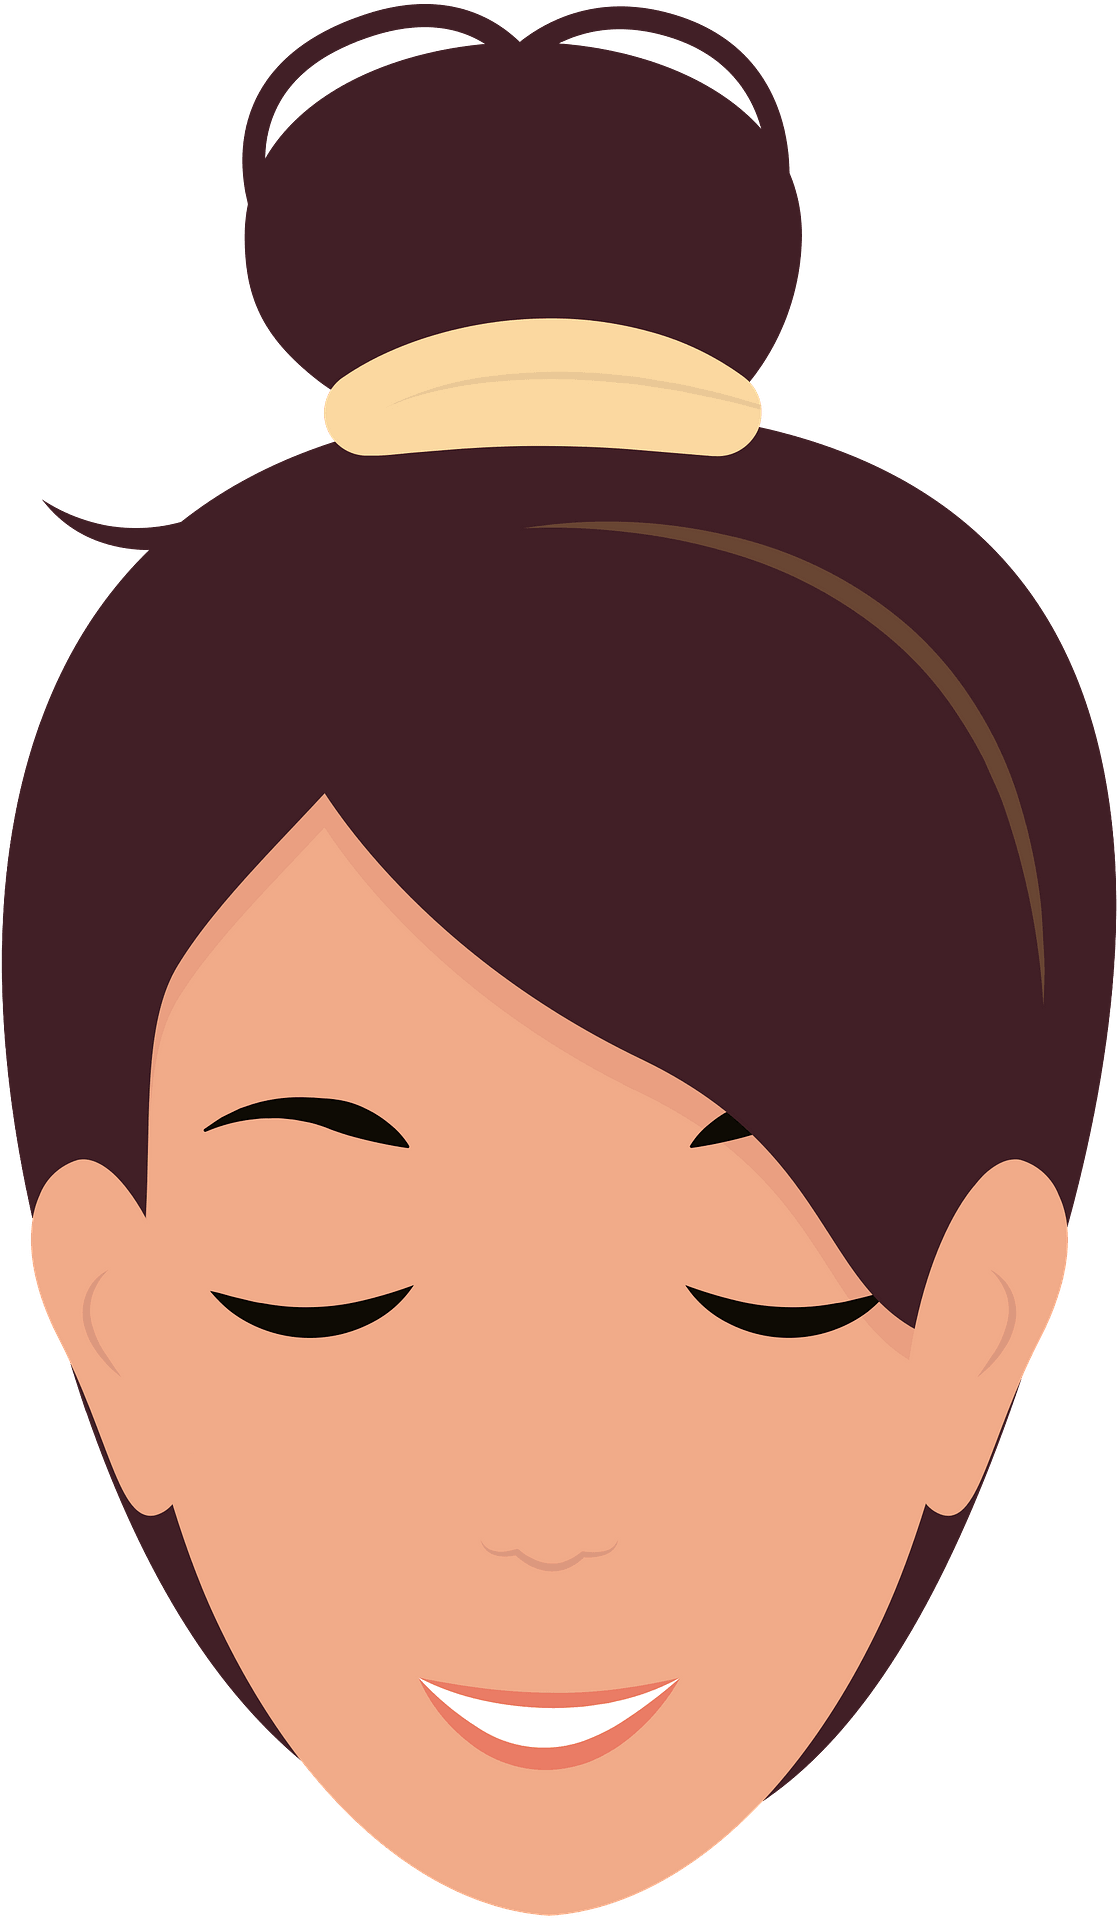 100 000 Closed Eyes Vector Images Depositphotos Clip Art Library